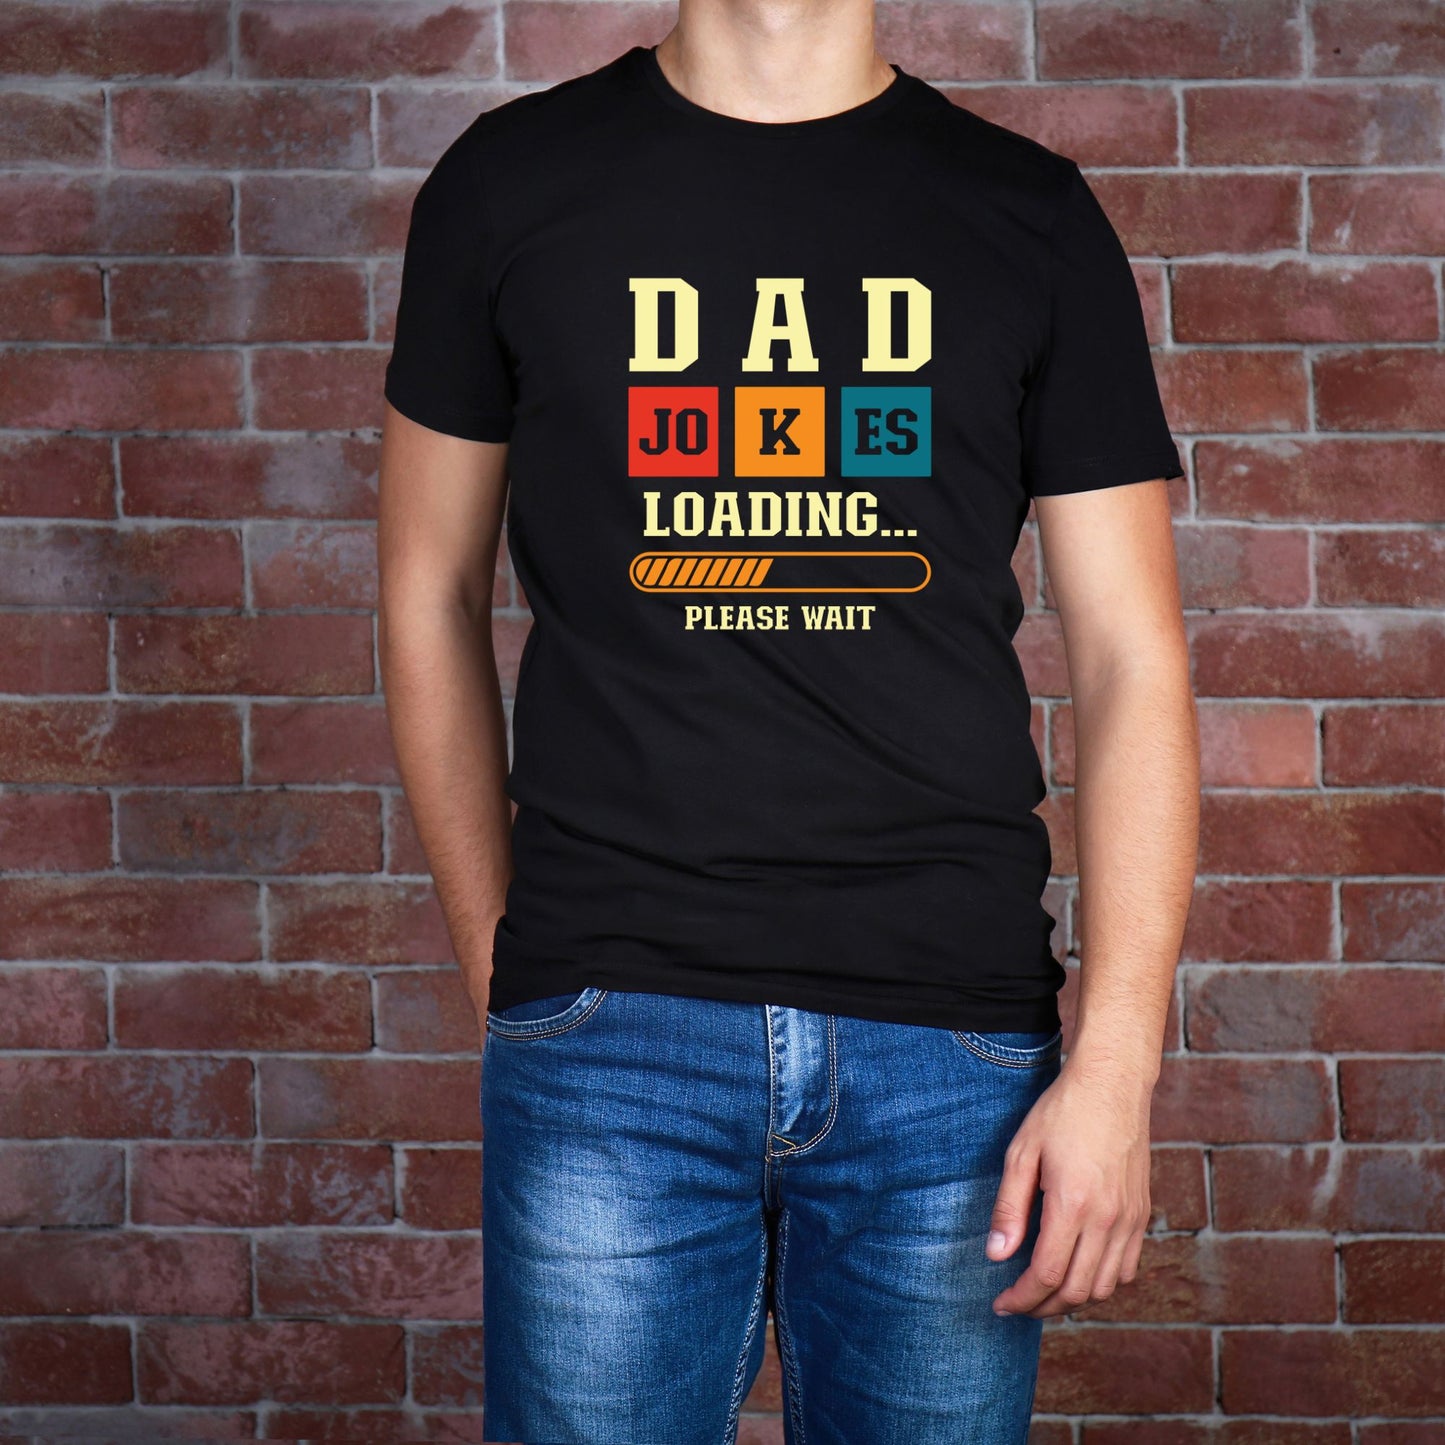 "Dad Jokes Loading" Funny T-Shirt for Father's Day Gift